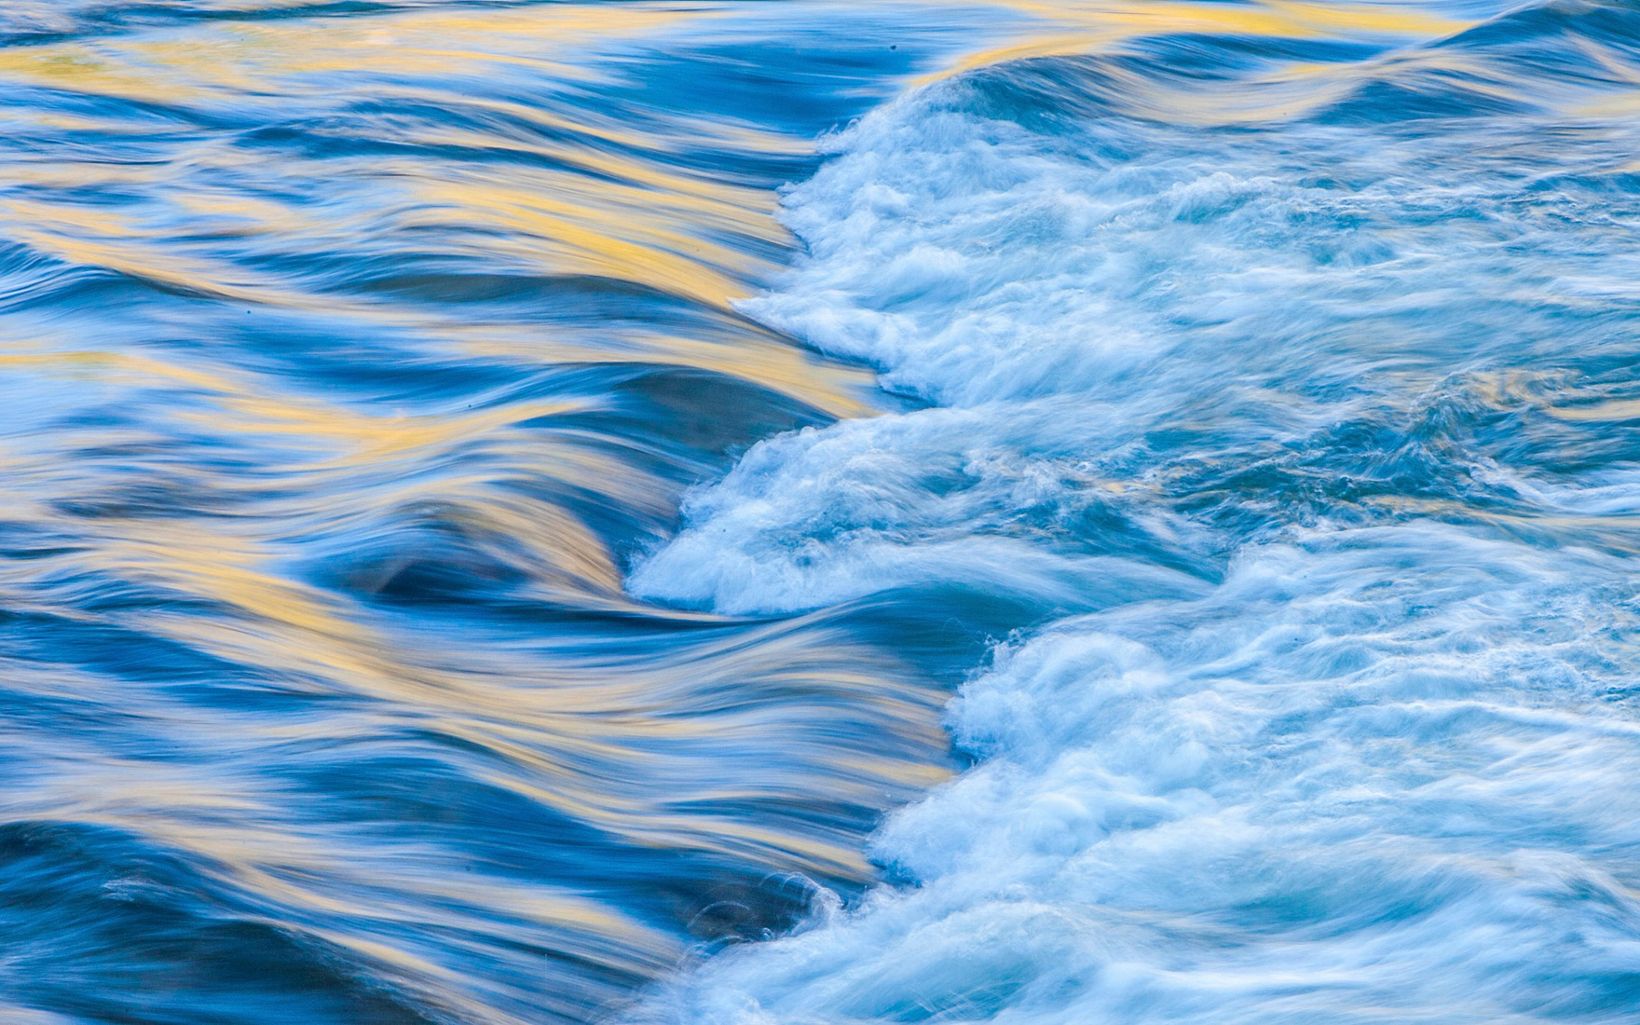 rippling waves of blue and white water